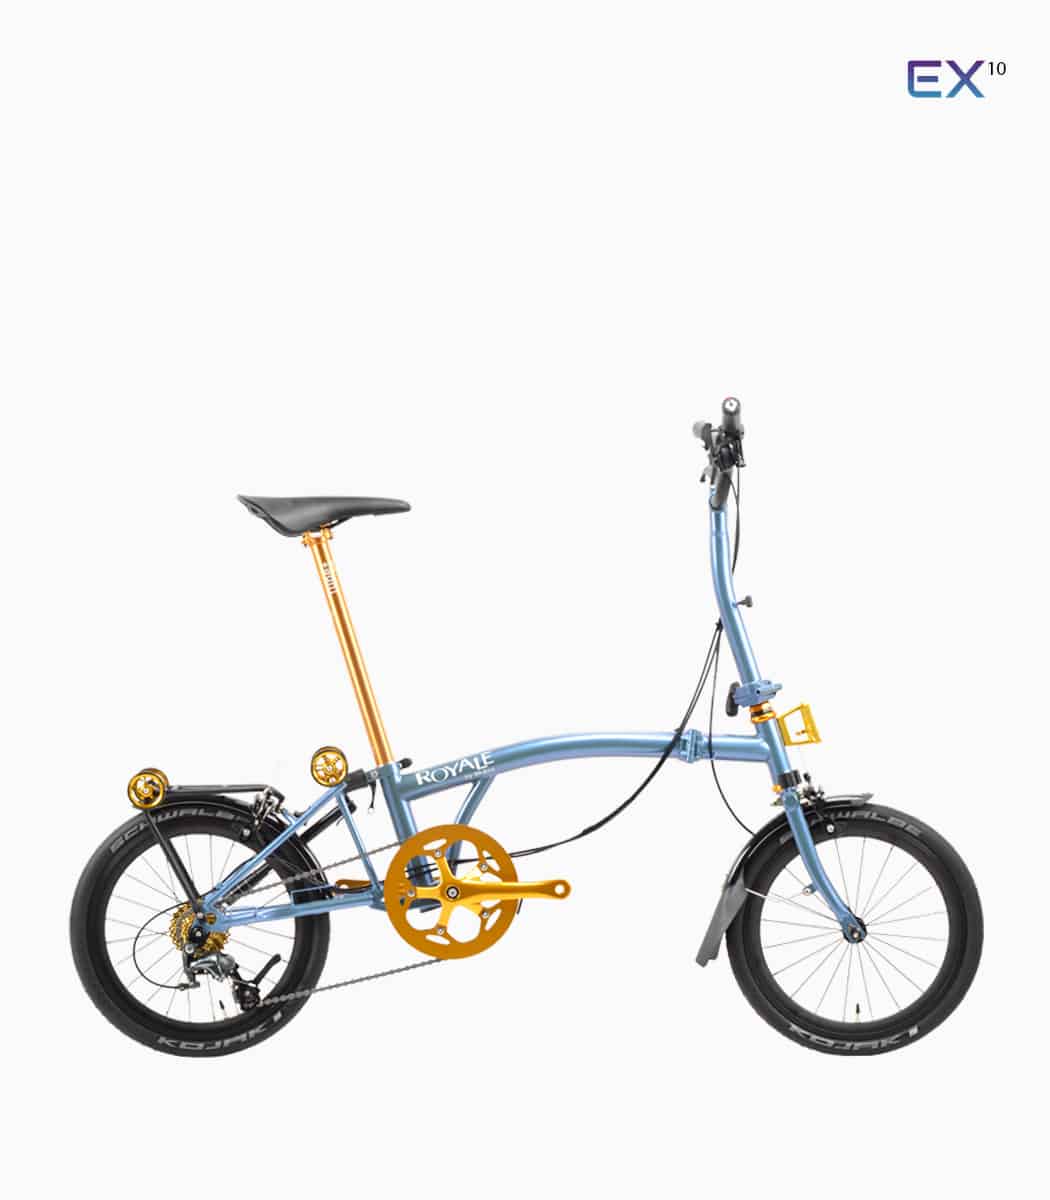 ROYALE EX M10 (STORM BLUE) foldable bicycle gold edition Schwalbe tyres right